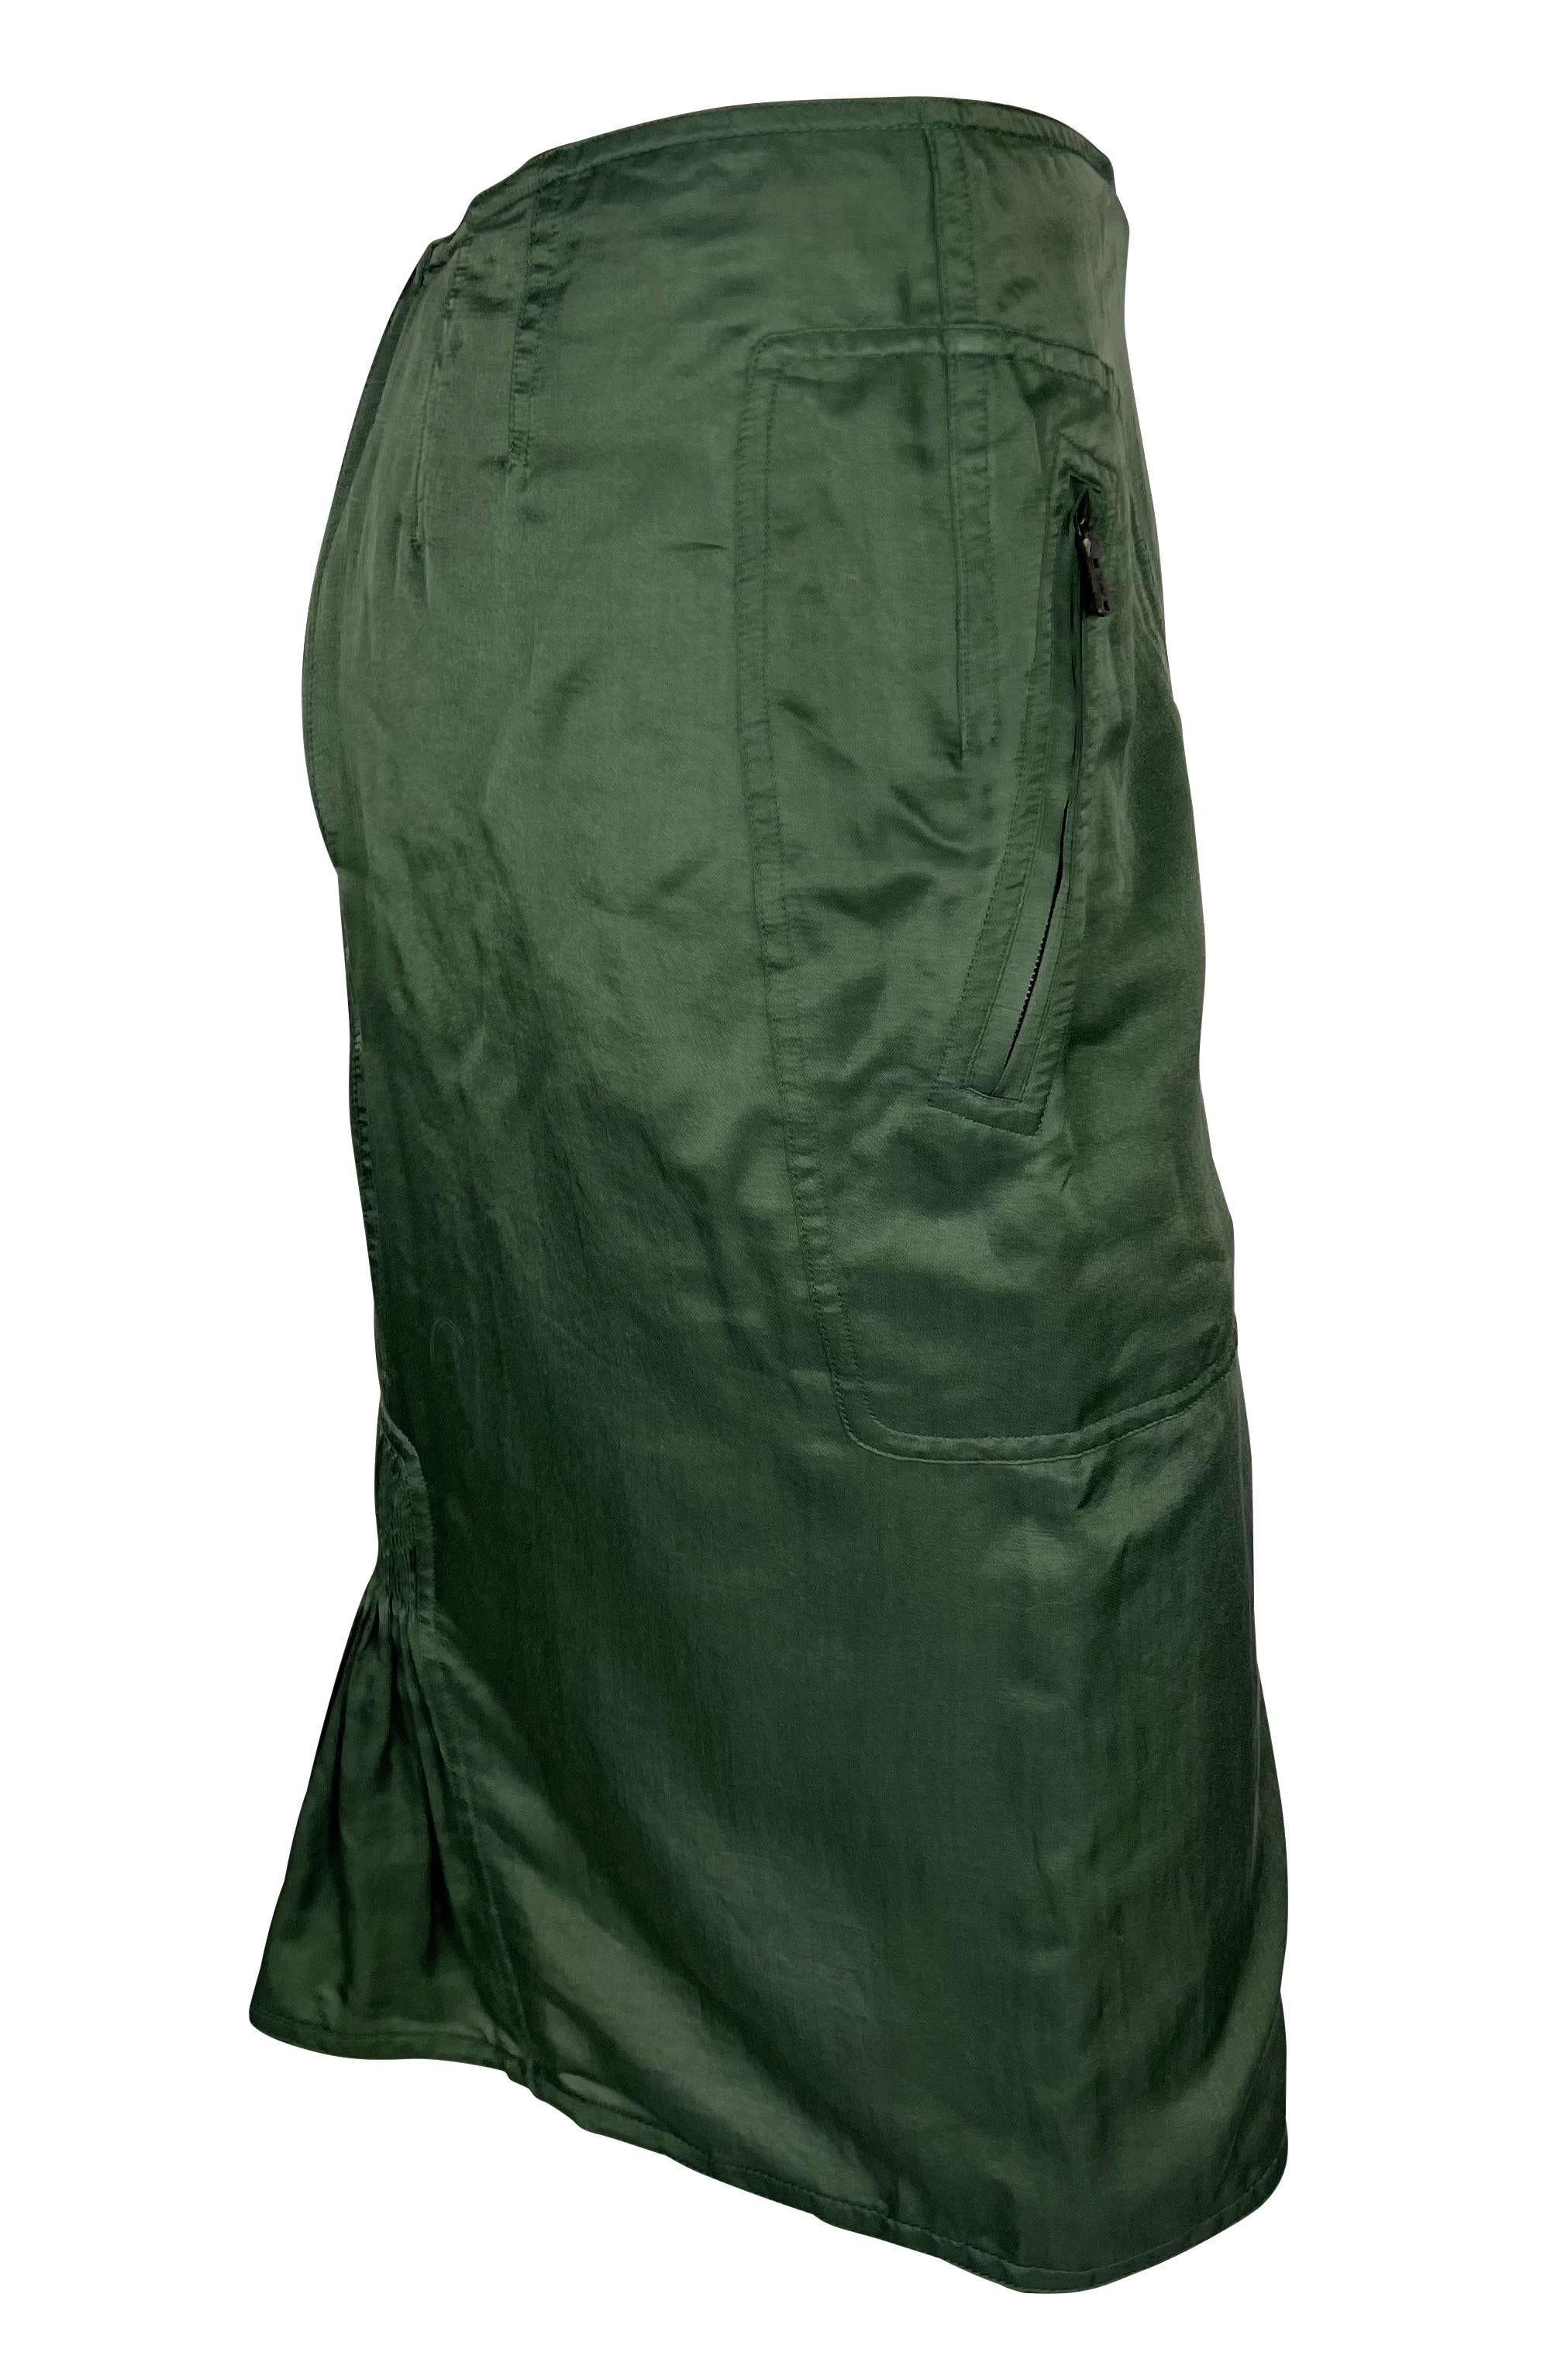 Women's S/S 2003 Yves Saint Laurent by Tom Ford Olive Green Ruched Stretch Skirt For Sale